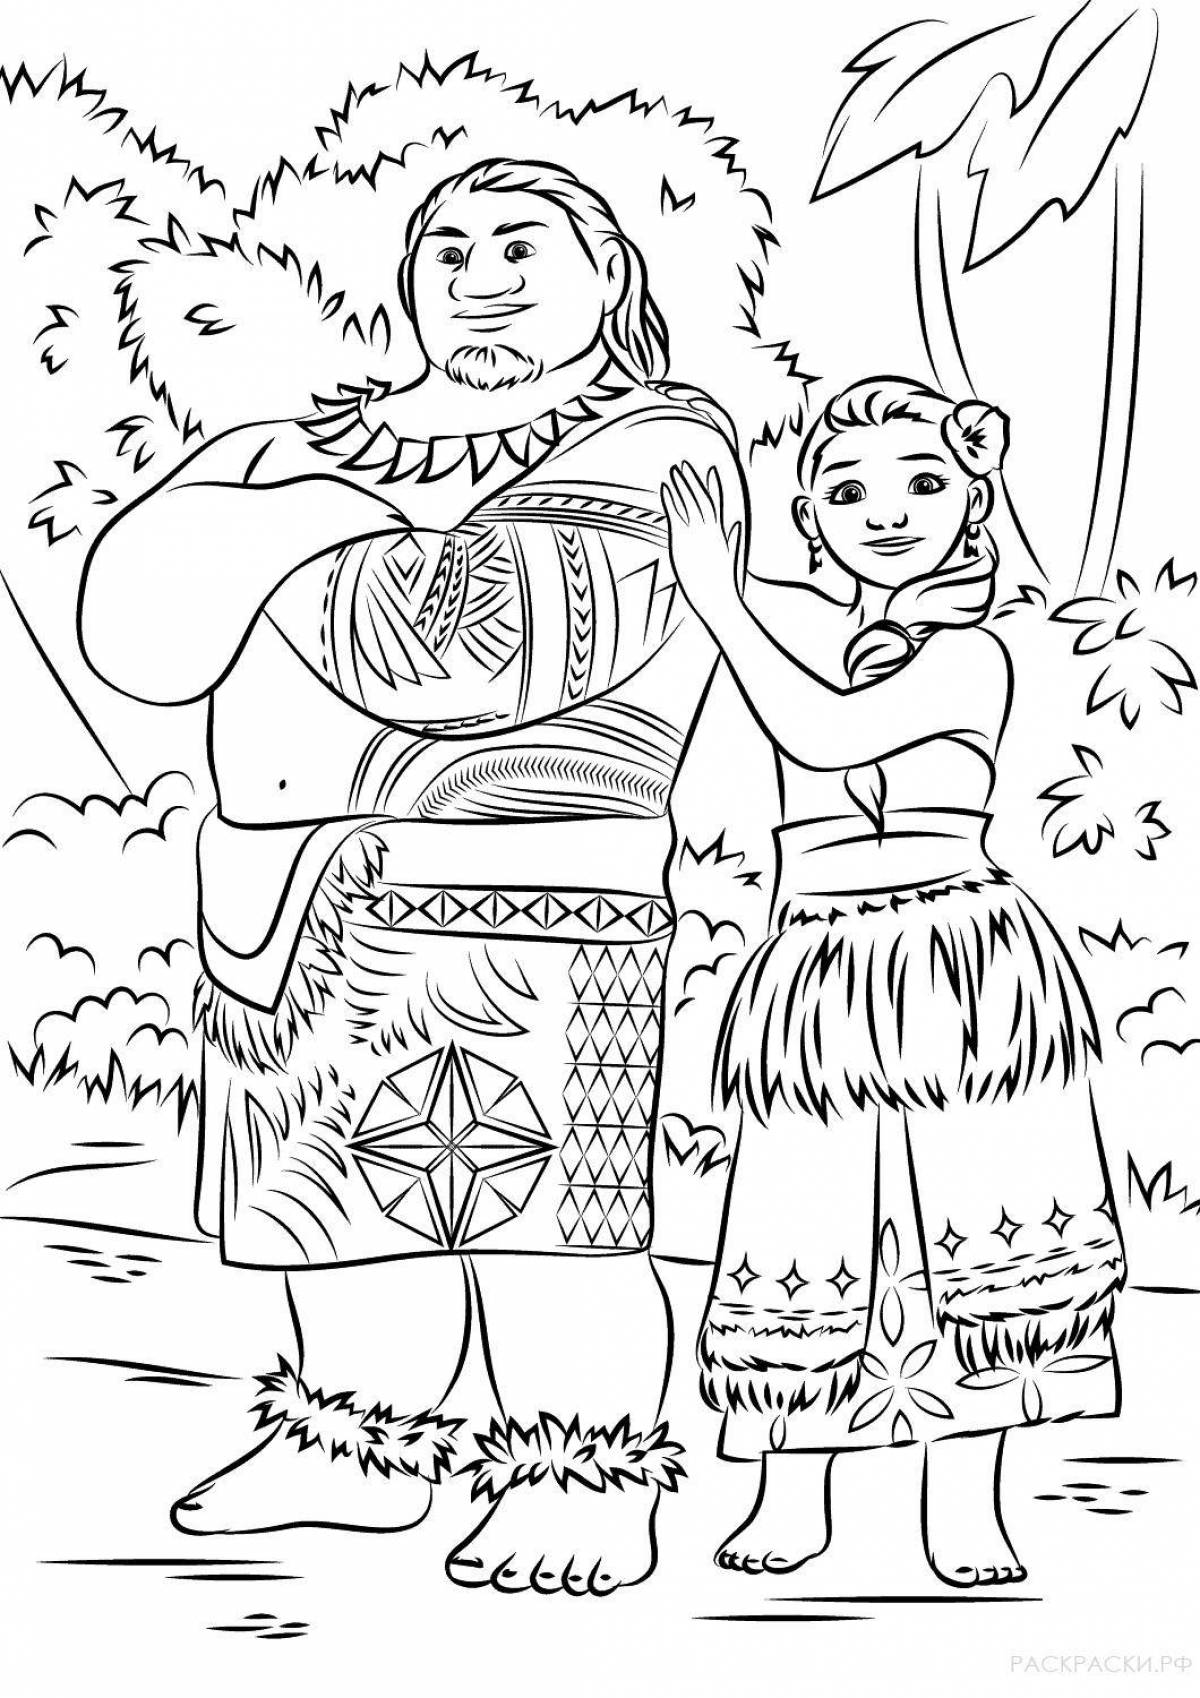 Moana coloring book for kids